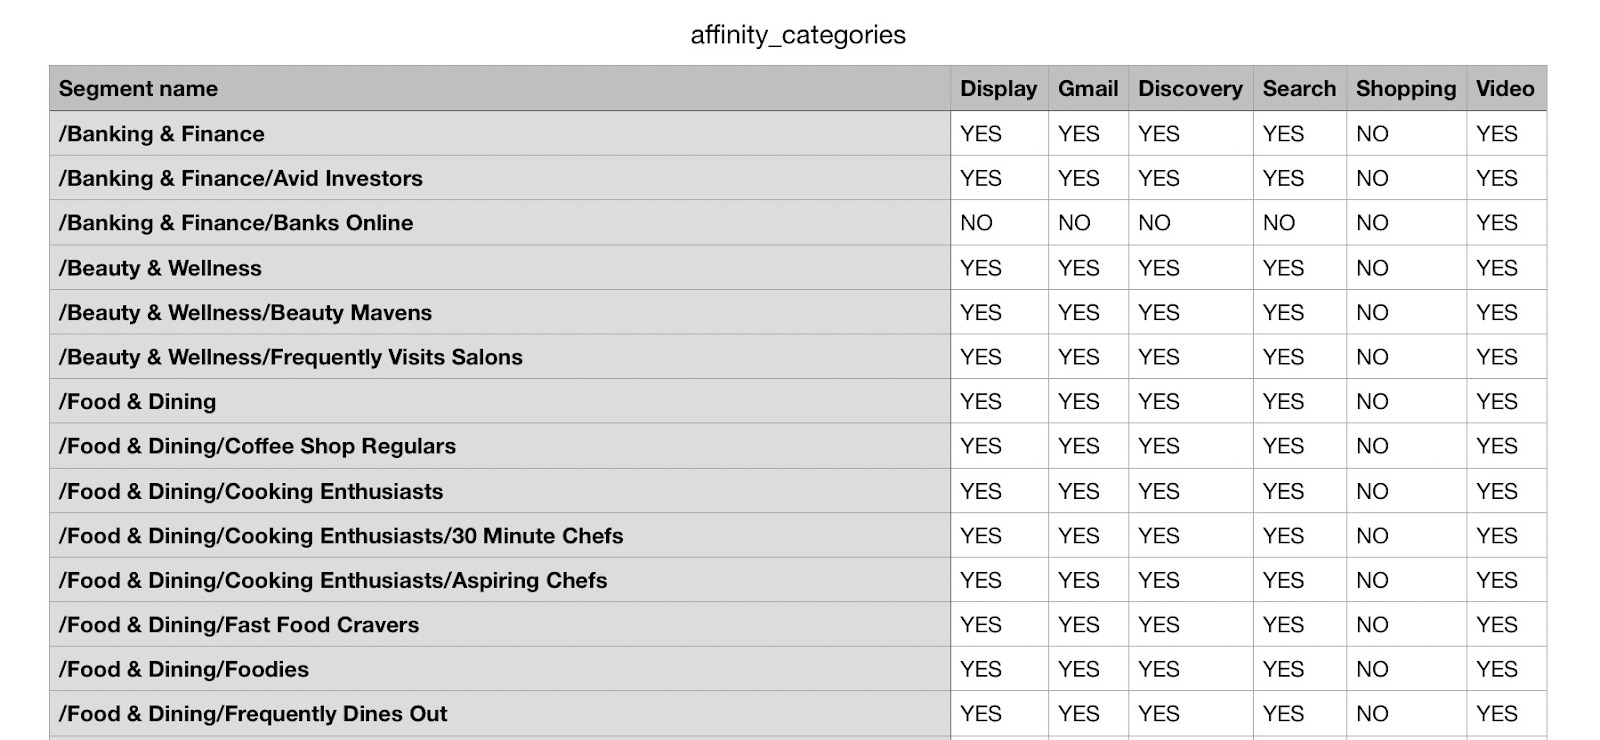 List of affinity categories 